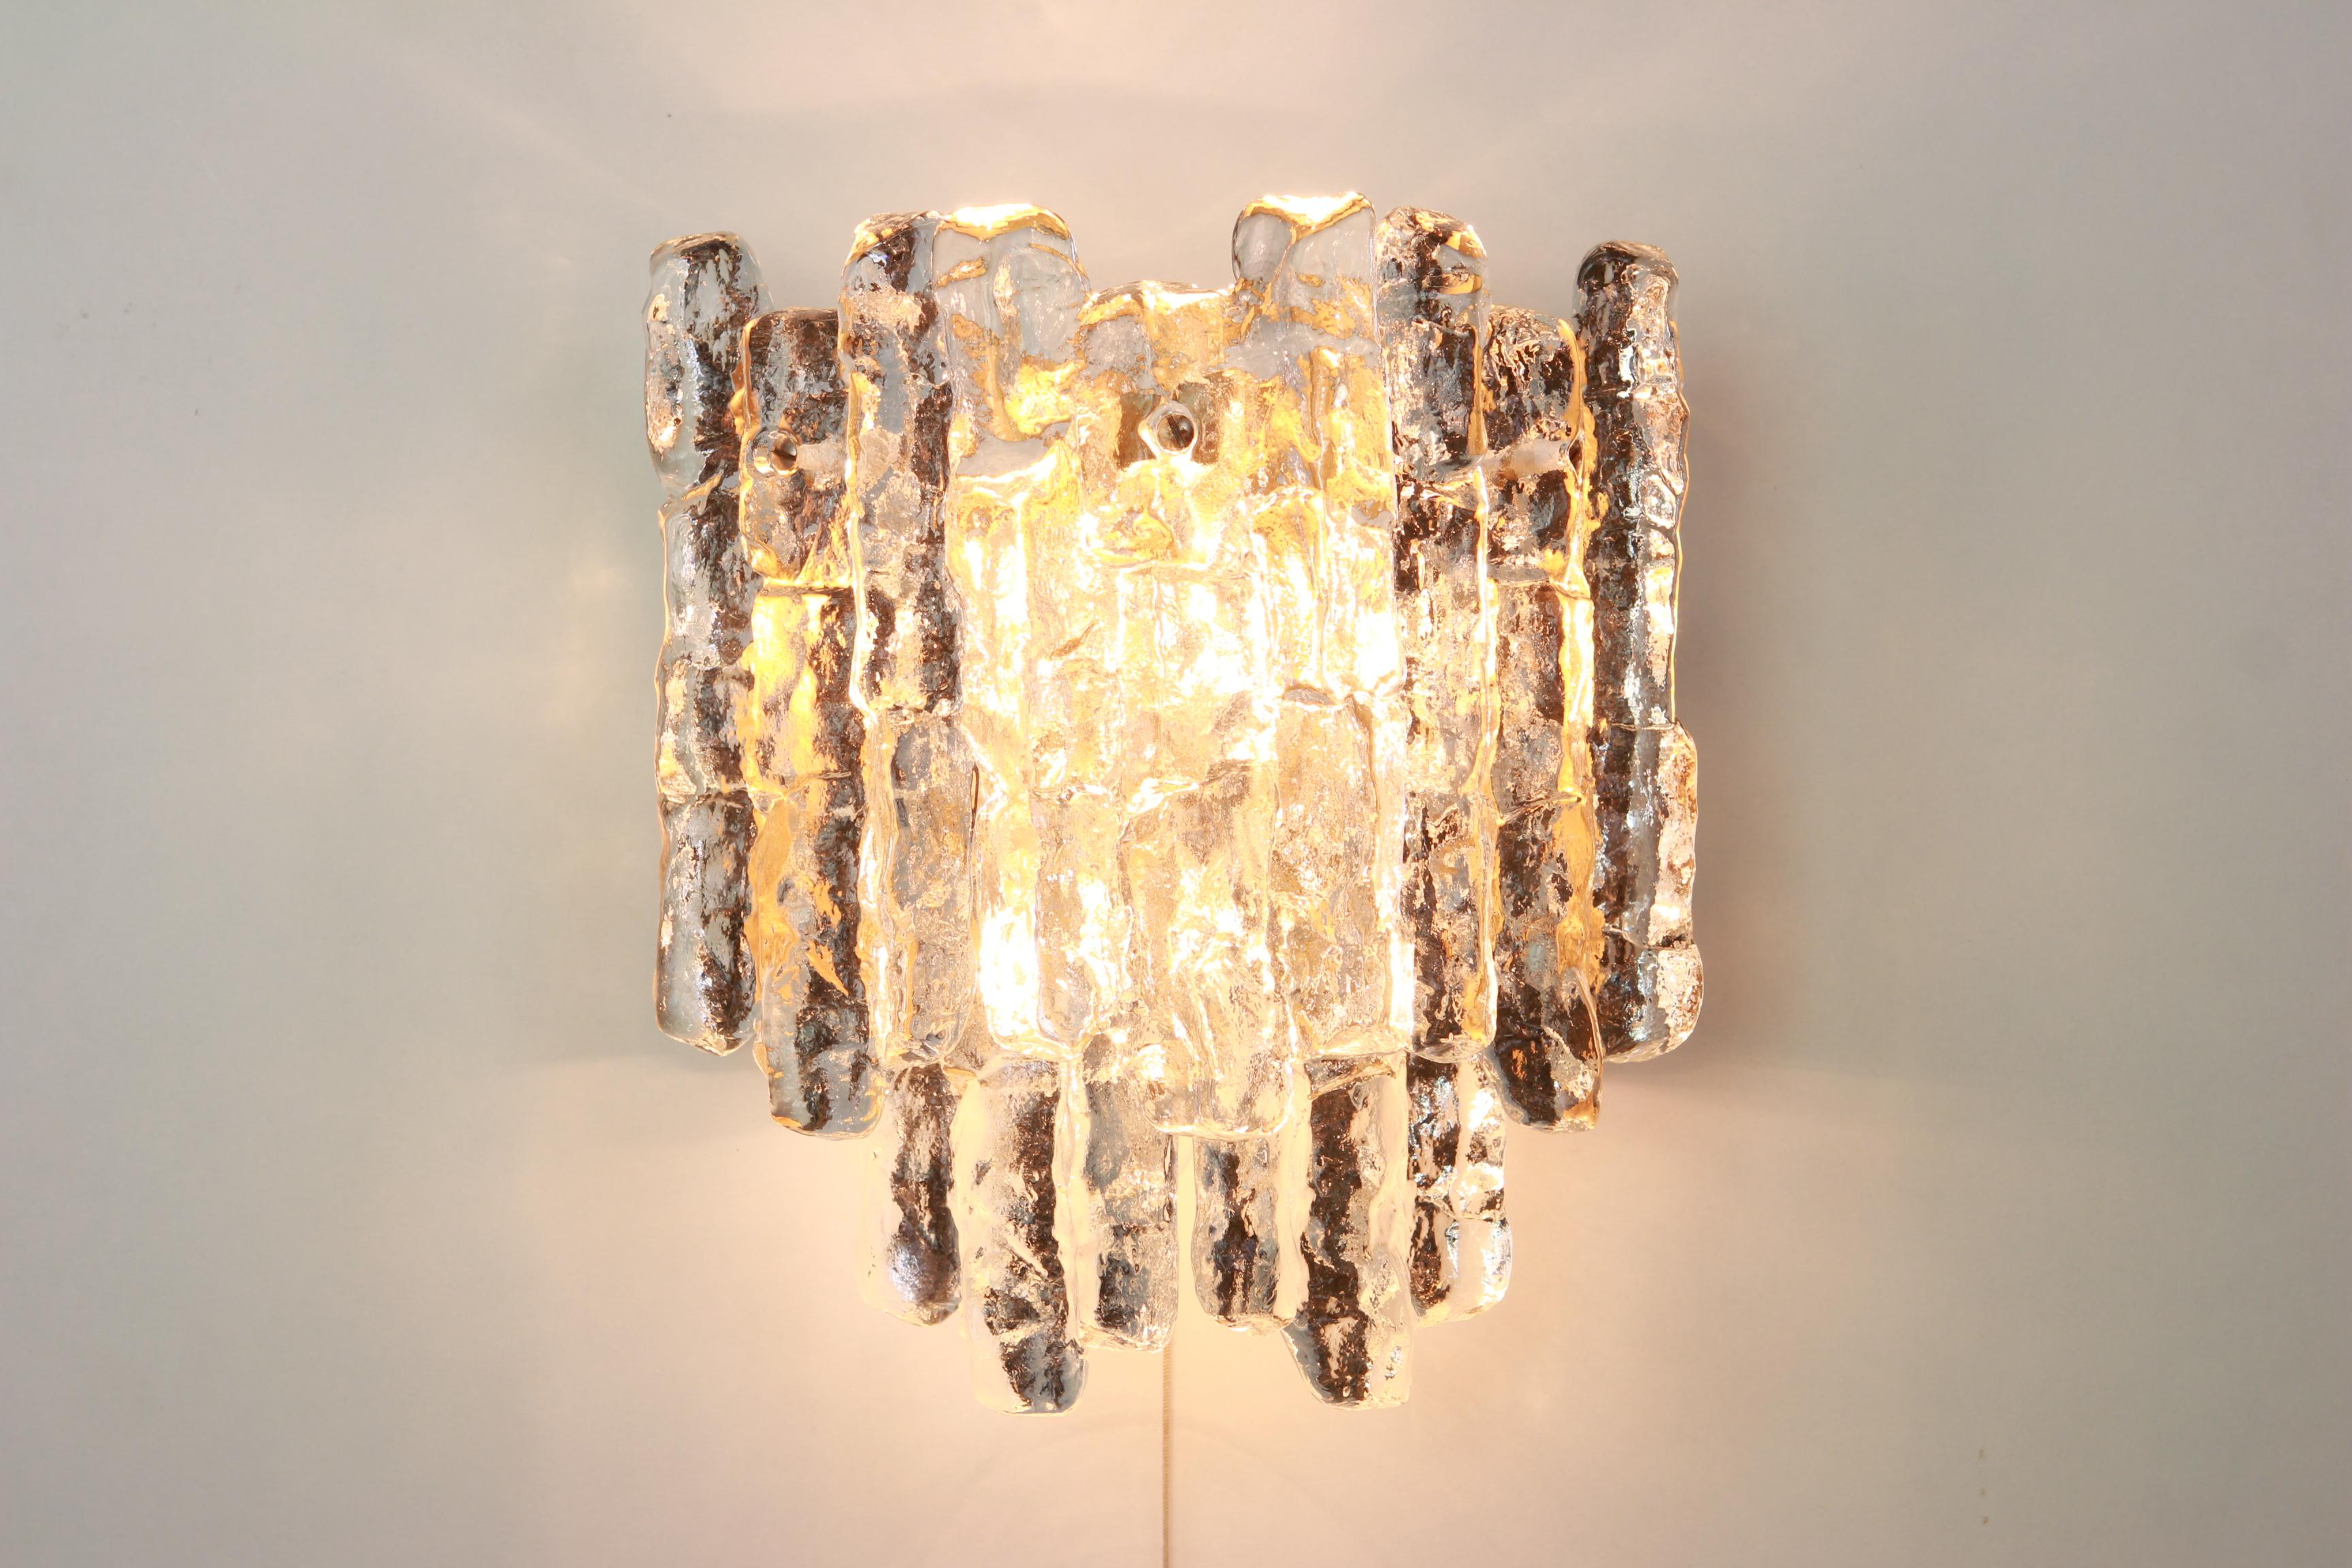 1 of 3 Pairs of Large Kalmar Sconces Wall Lights, Austria, 1960s For Sale 1